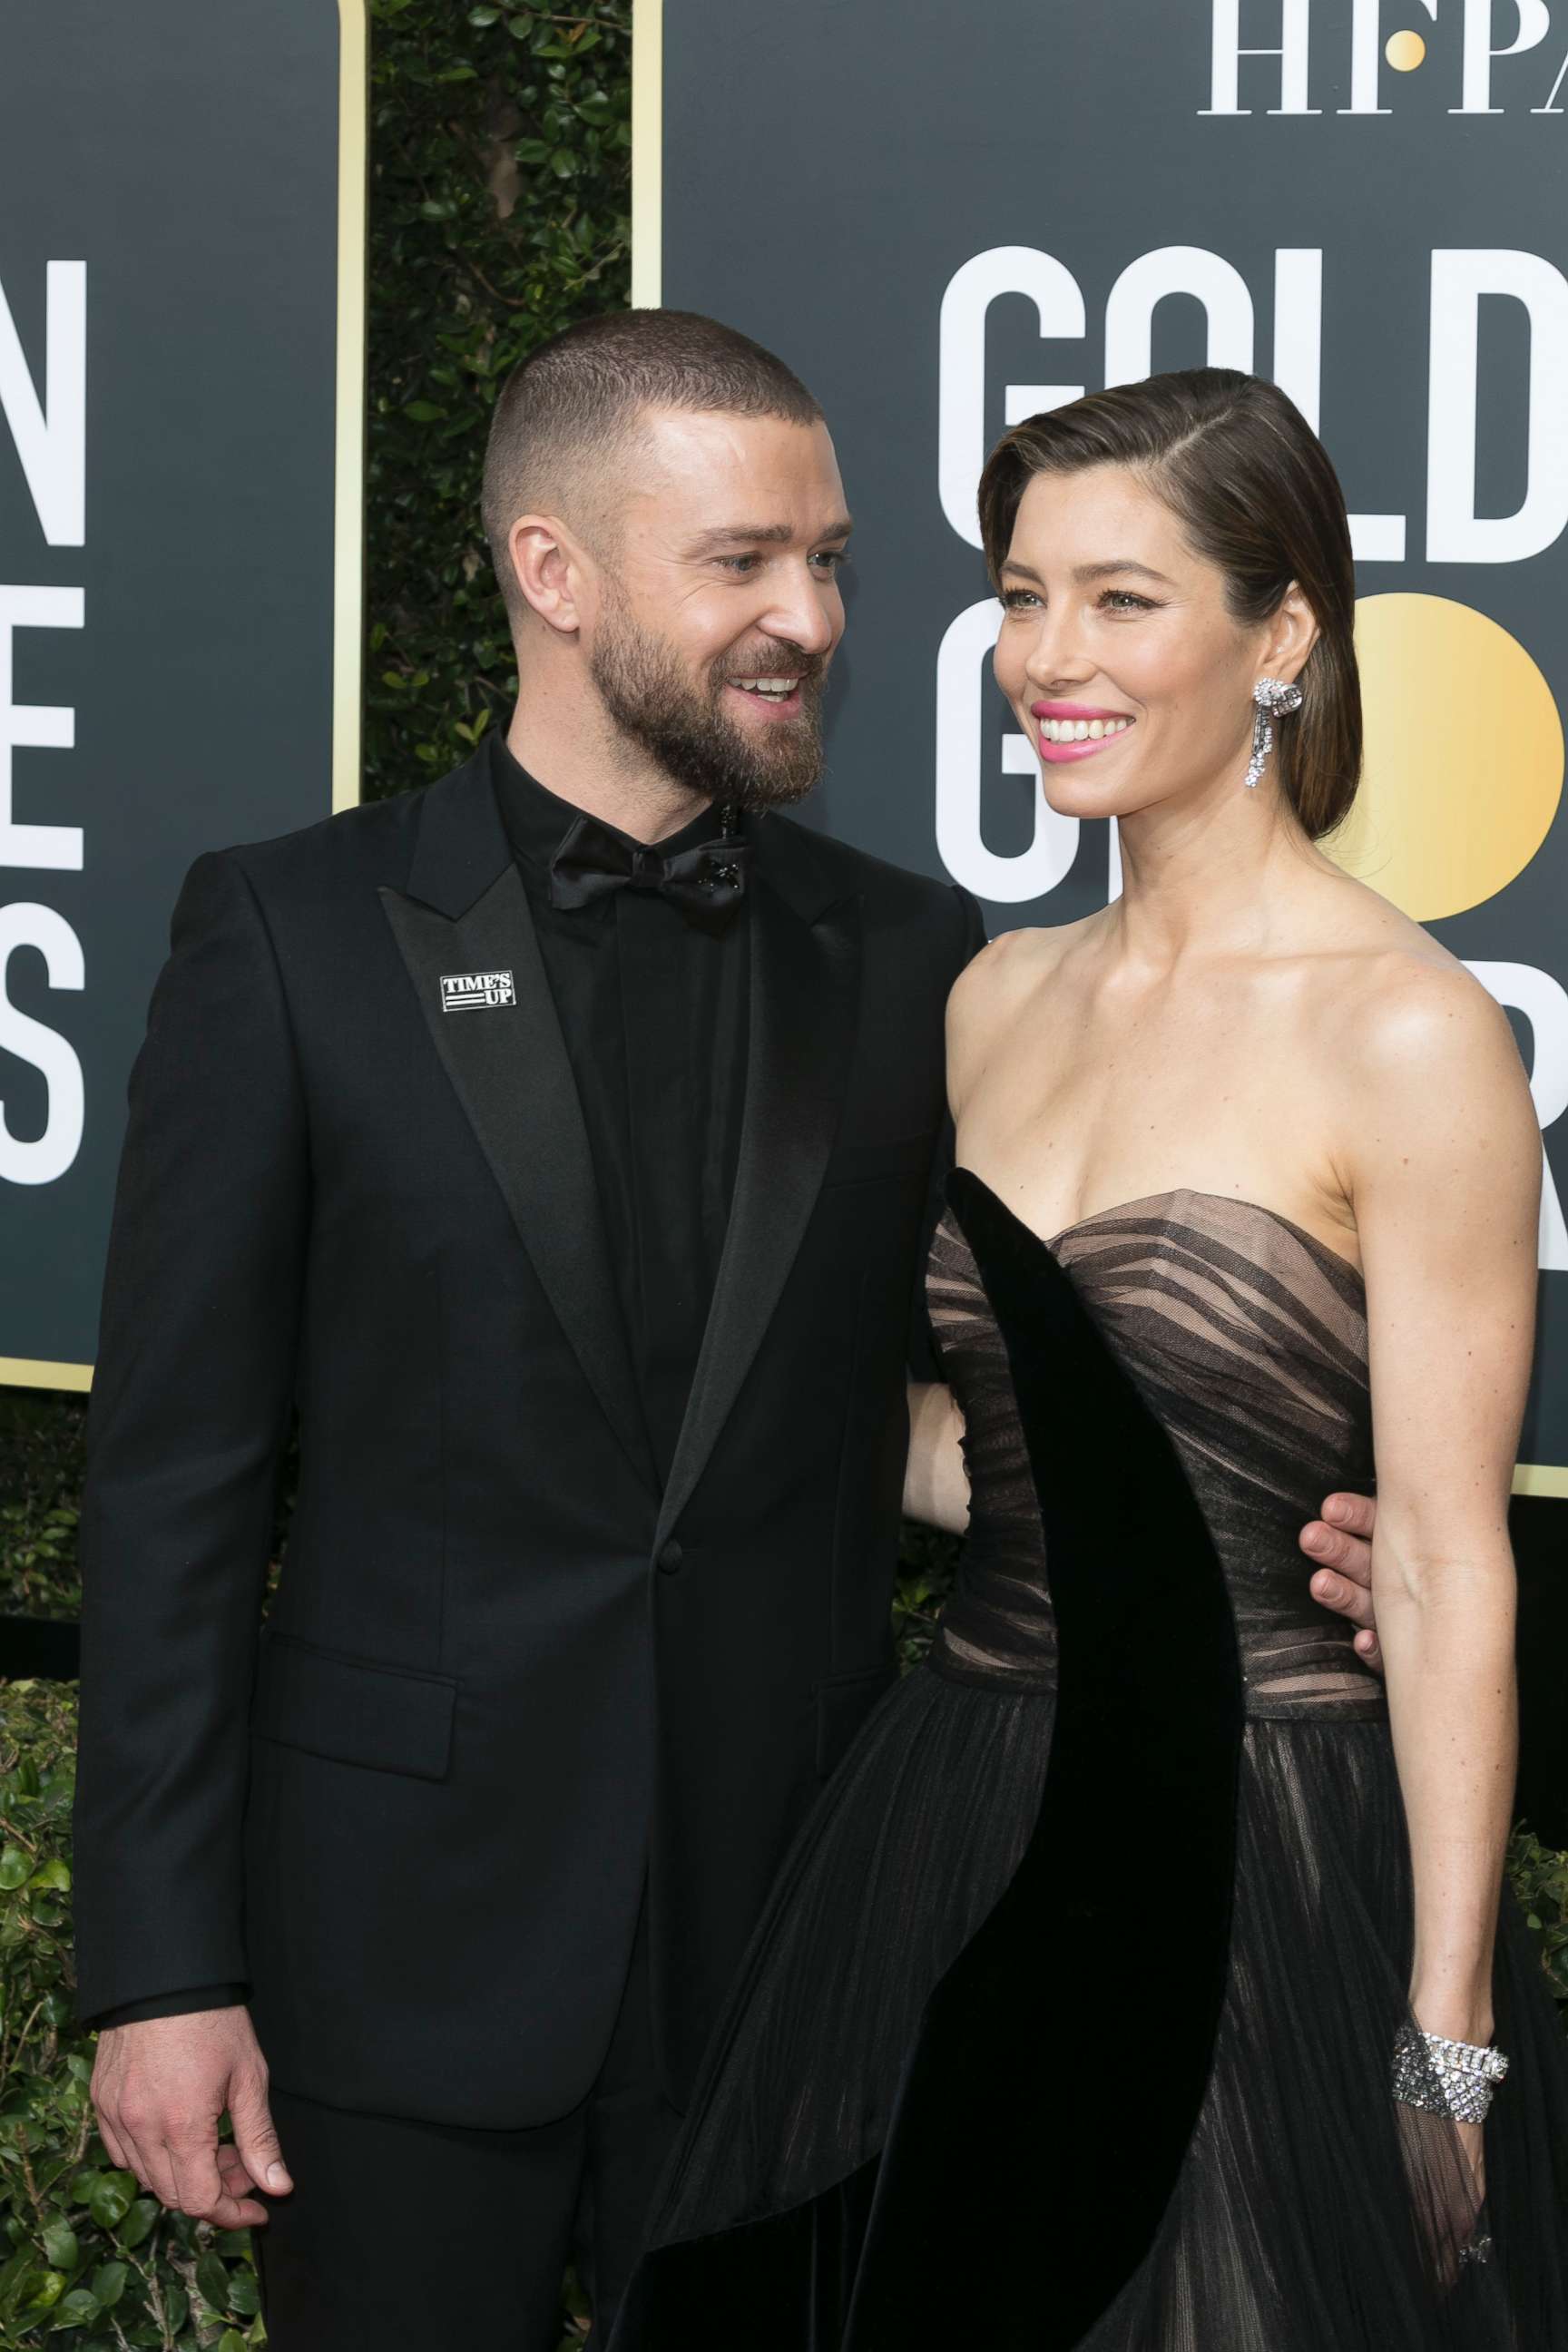 PHOTO: Justin Timberlake and Jessica Biel attend the 75th Golden Globe Awards 2018 at Hotel Beverly Hilton in Beverly Hills, Calif. Jan. 7, 2018.